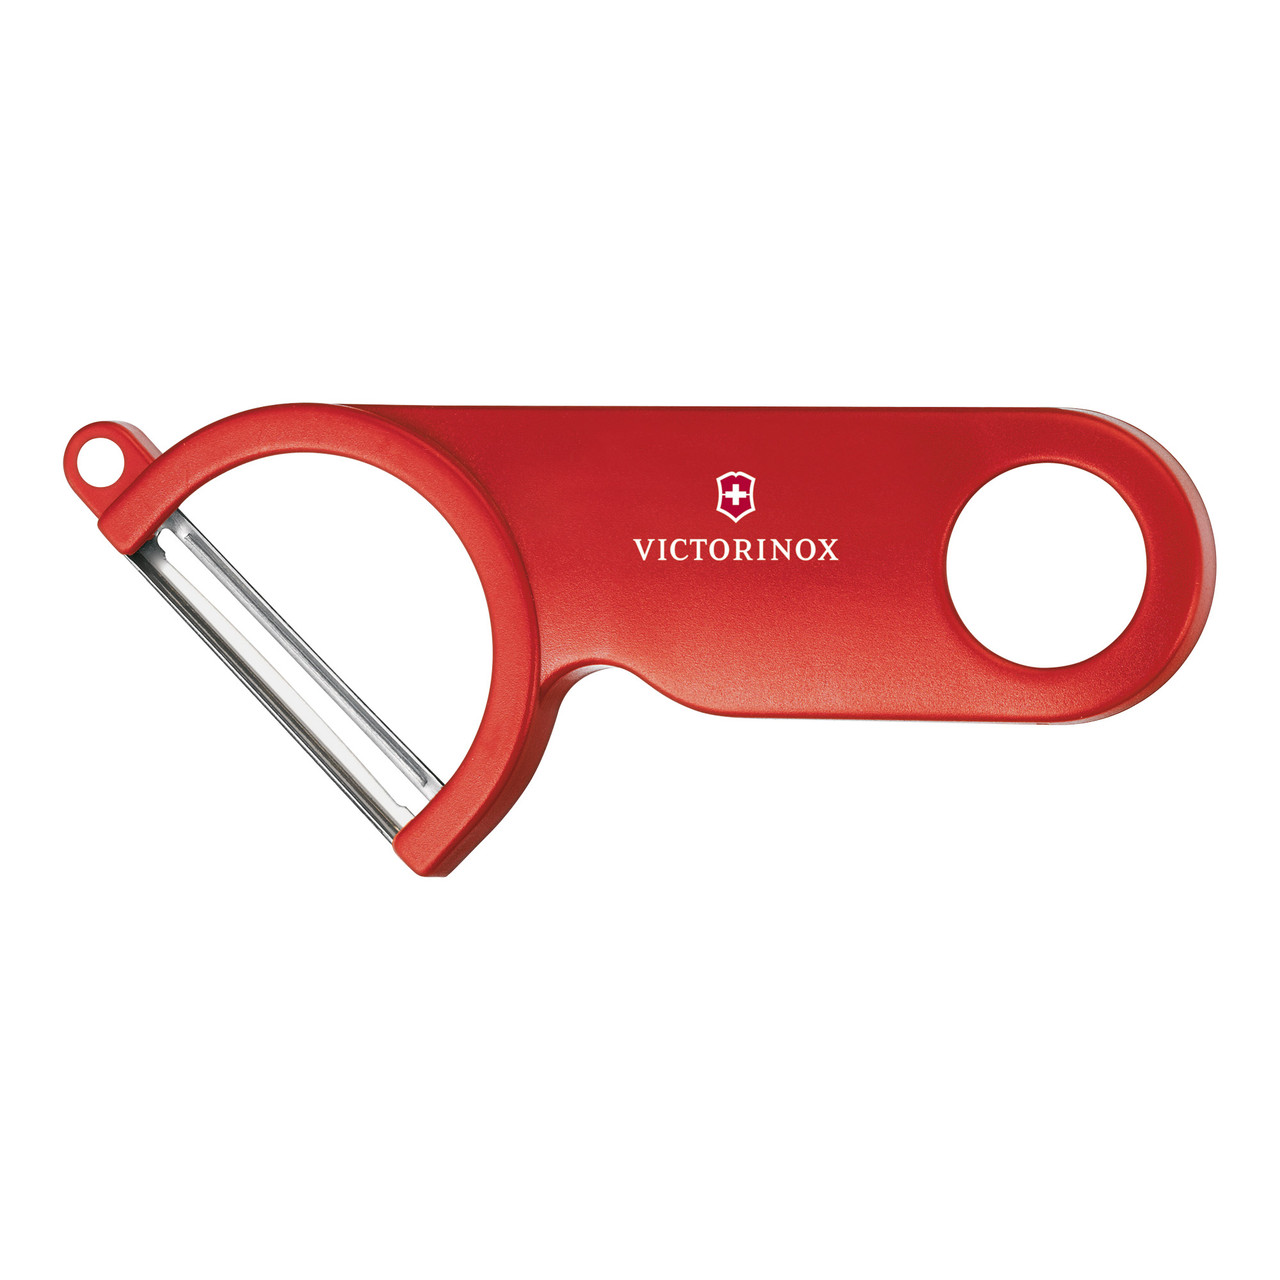 https://www.hospitalitydirectory.com.au/images/product_images/Victorinox/Showcases/2024/Accessories/POTATO%20PEELER,%20PIVOTING%20BLADE.jpg